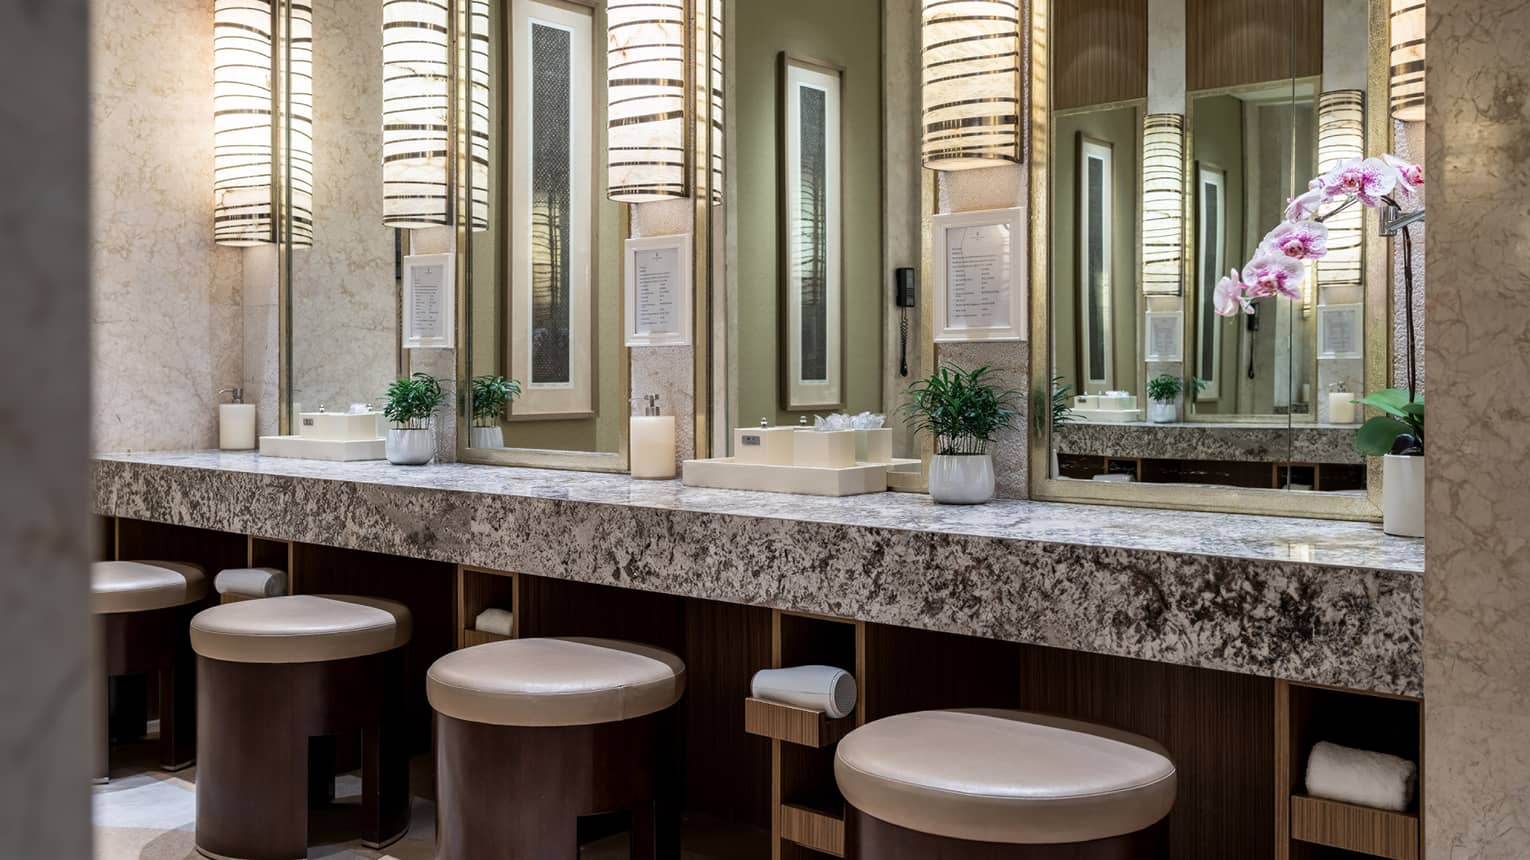 A modern spa vanity with rounded stools, rectangular mirrors and granite countertops